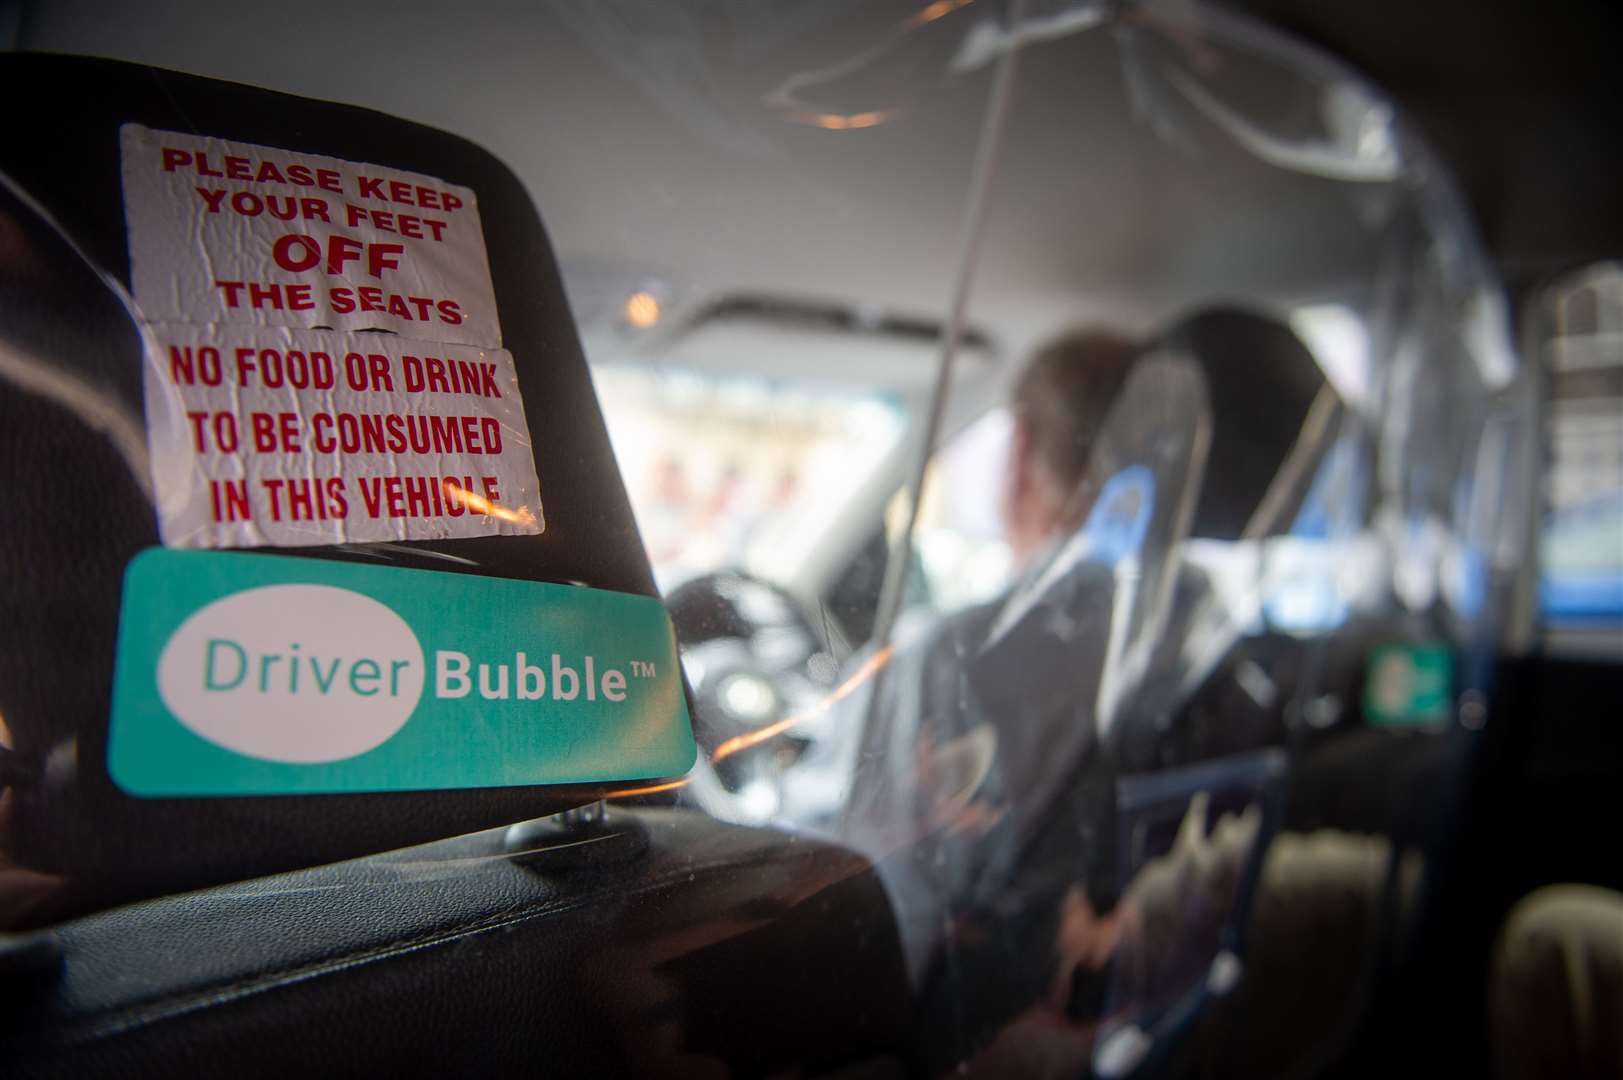 Safety measures introduced in taxis because of the pandemic – all cabs are fitted with a plastic driver bubble and passengers must wear masks.